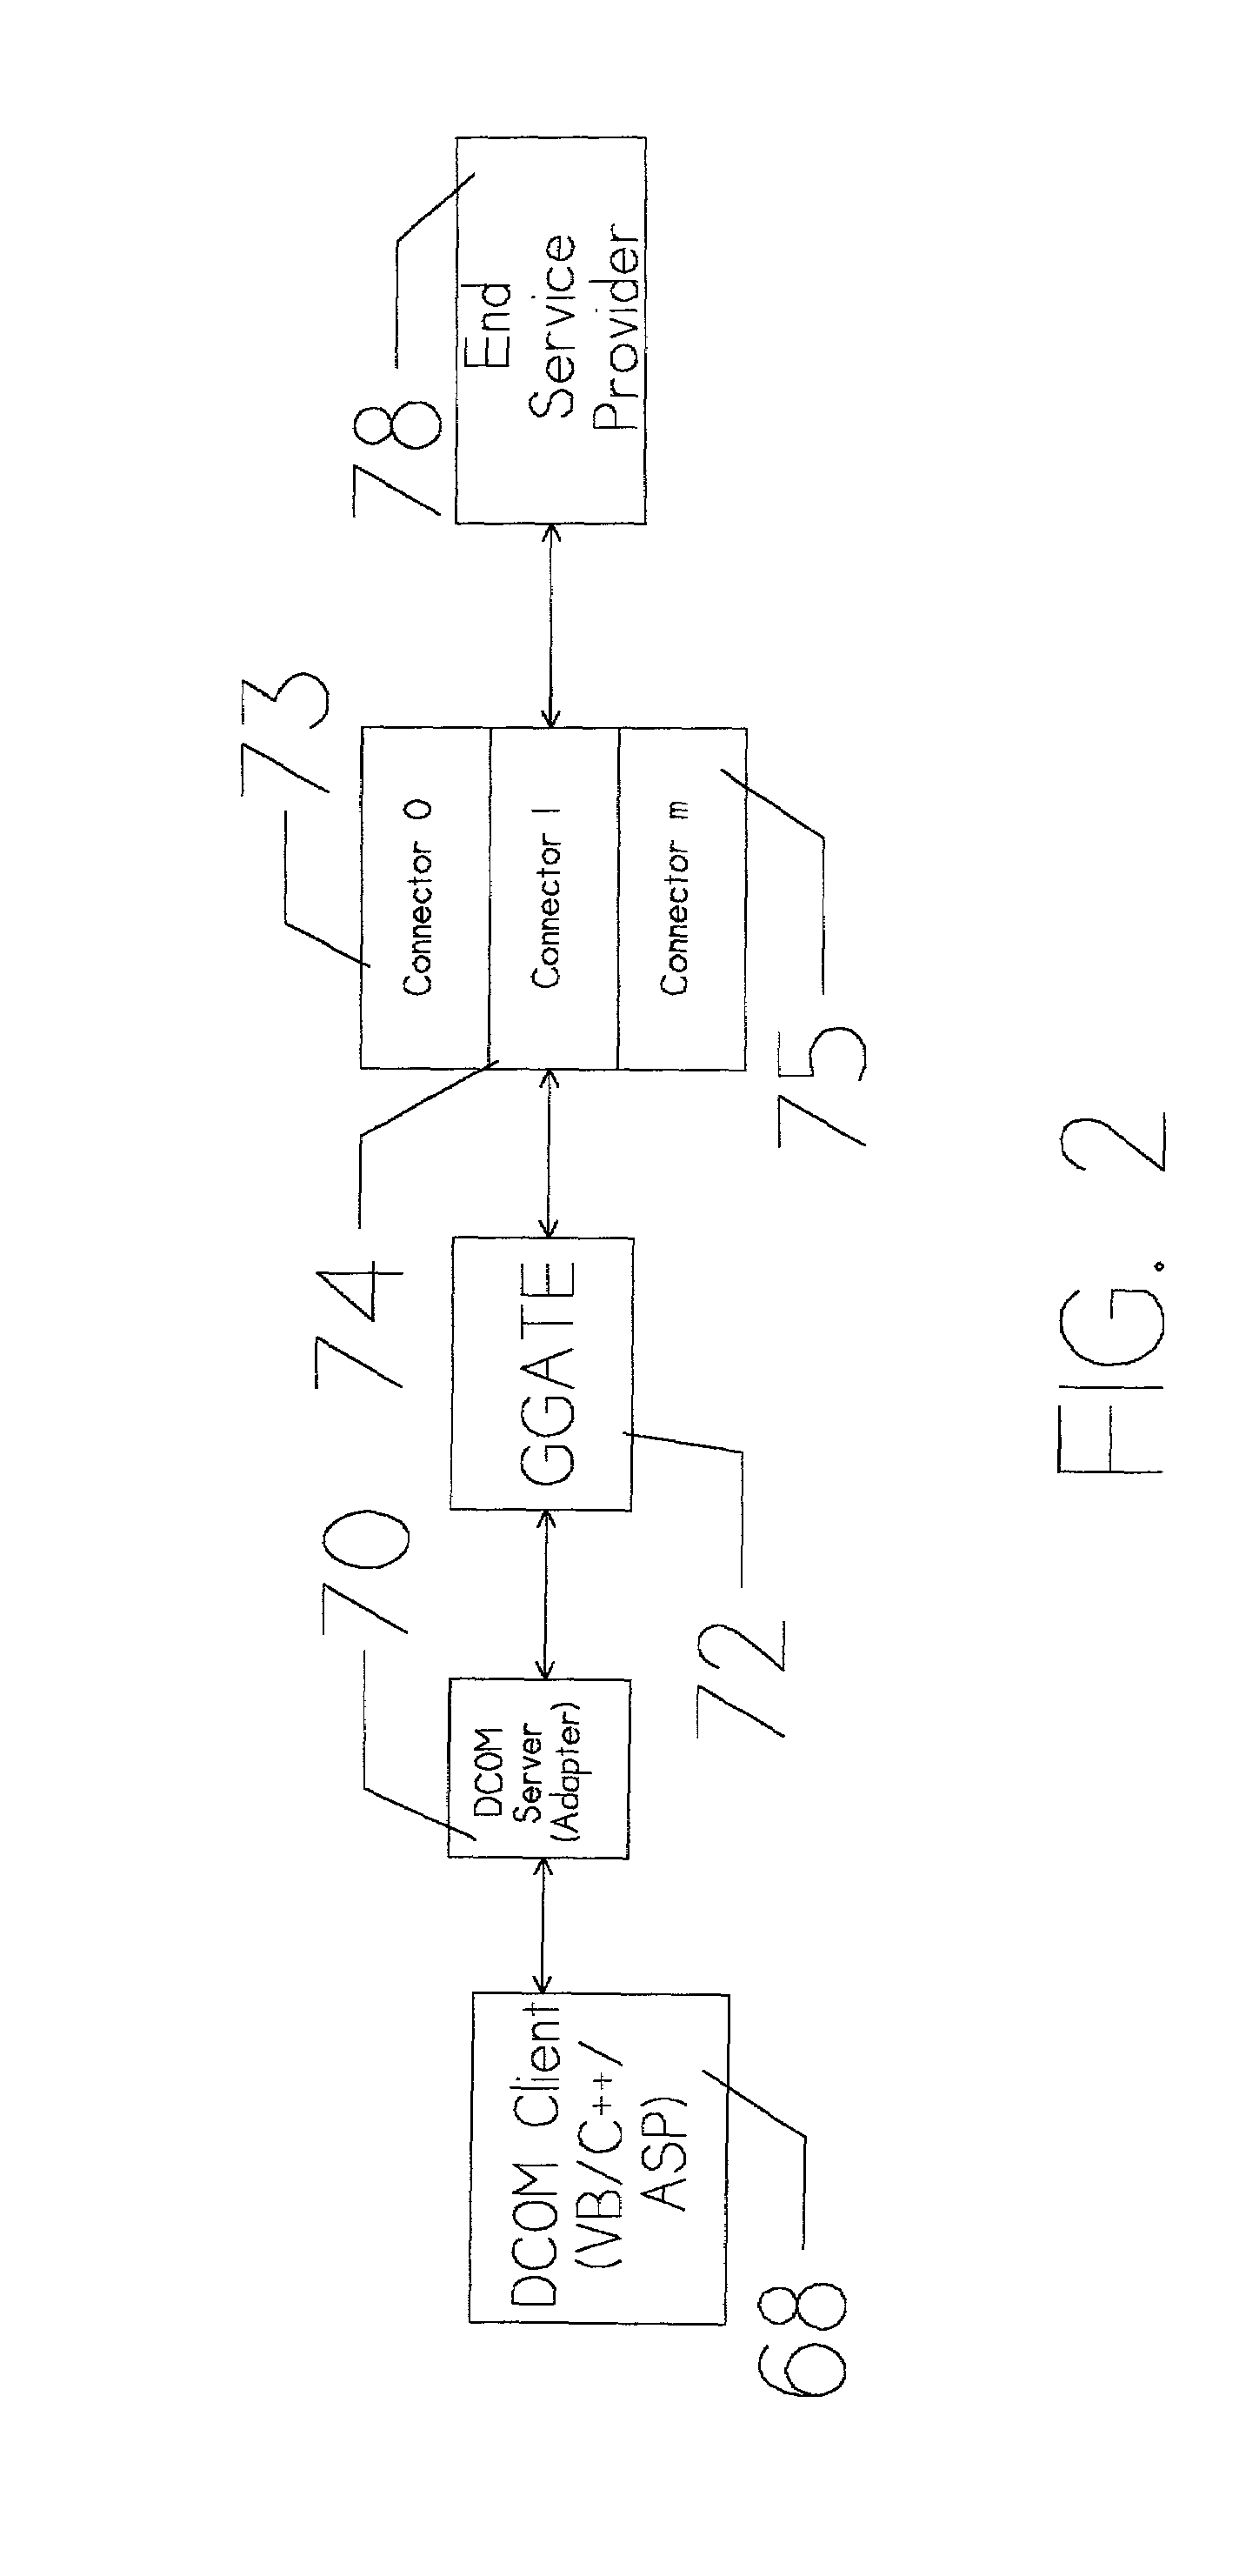 Method and apparatus for passing service requests and data from web based workstations directly to online transaction processing (OLTP) server systems